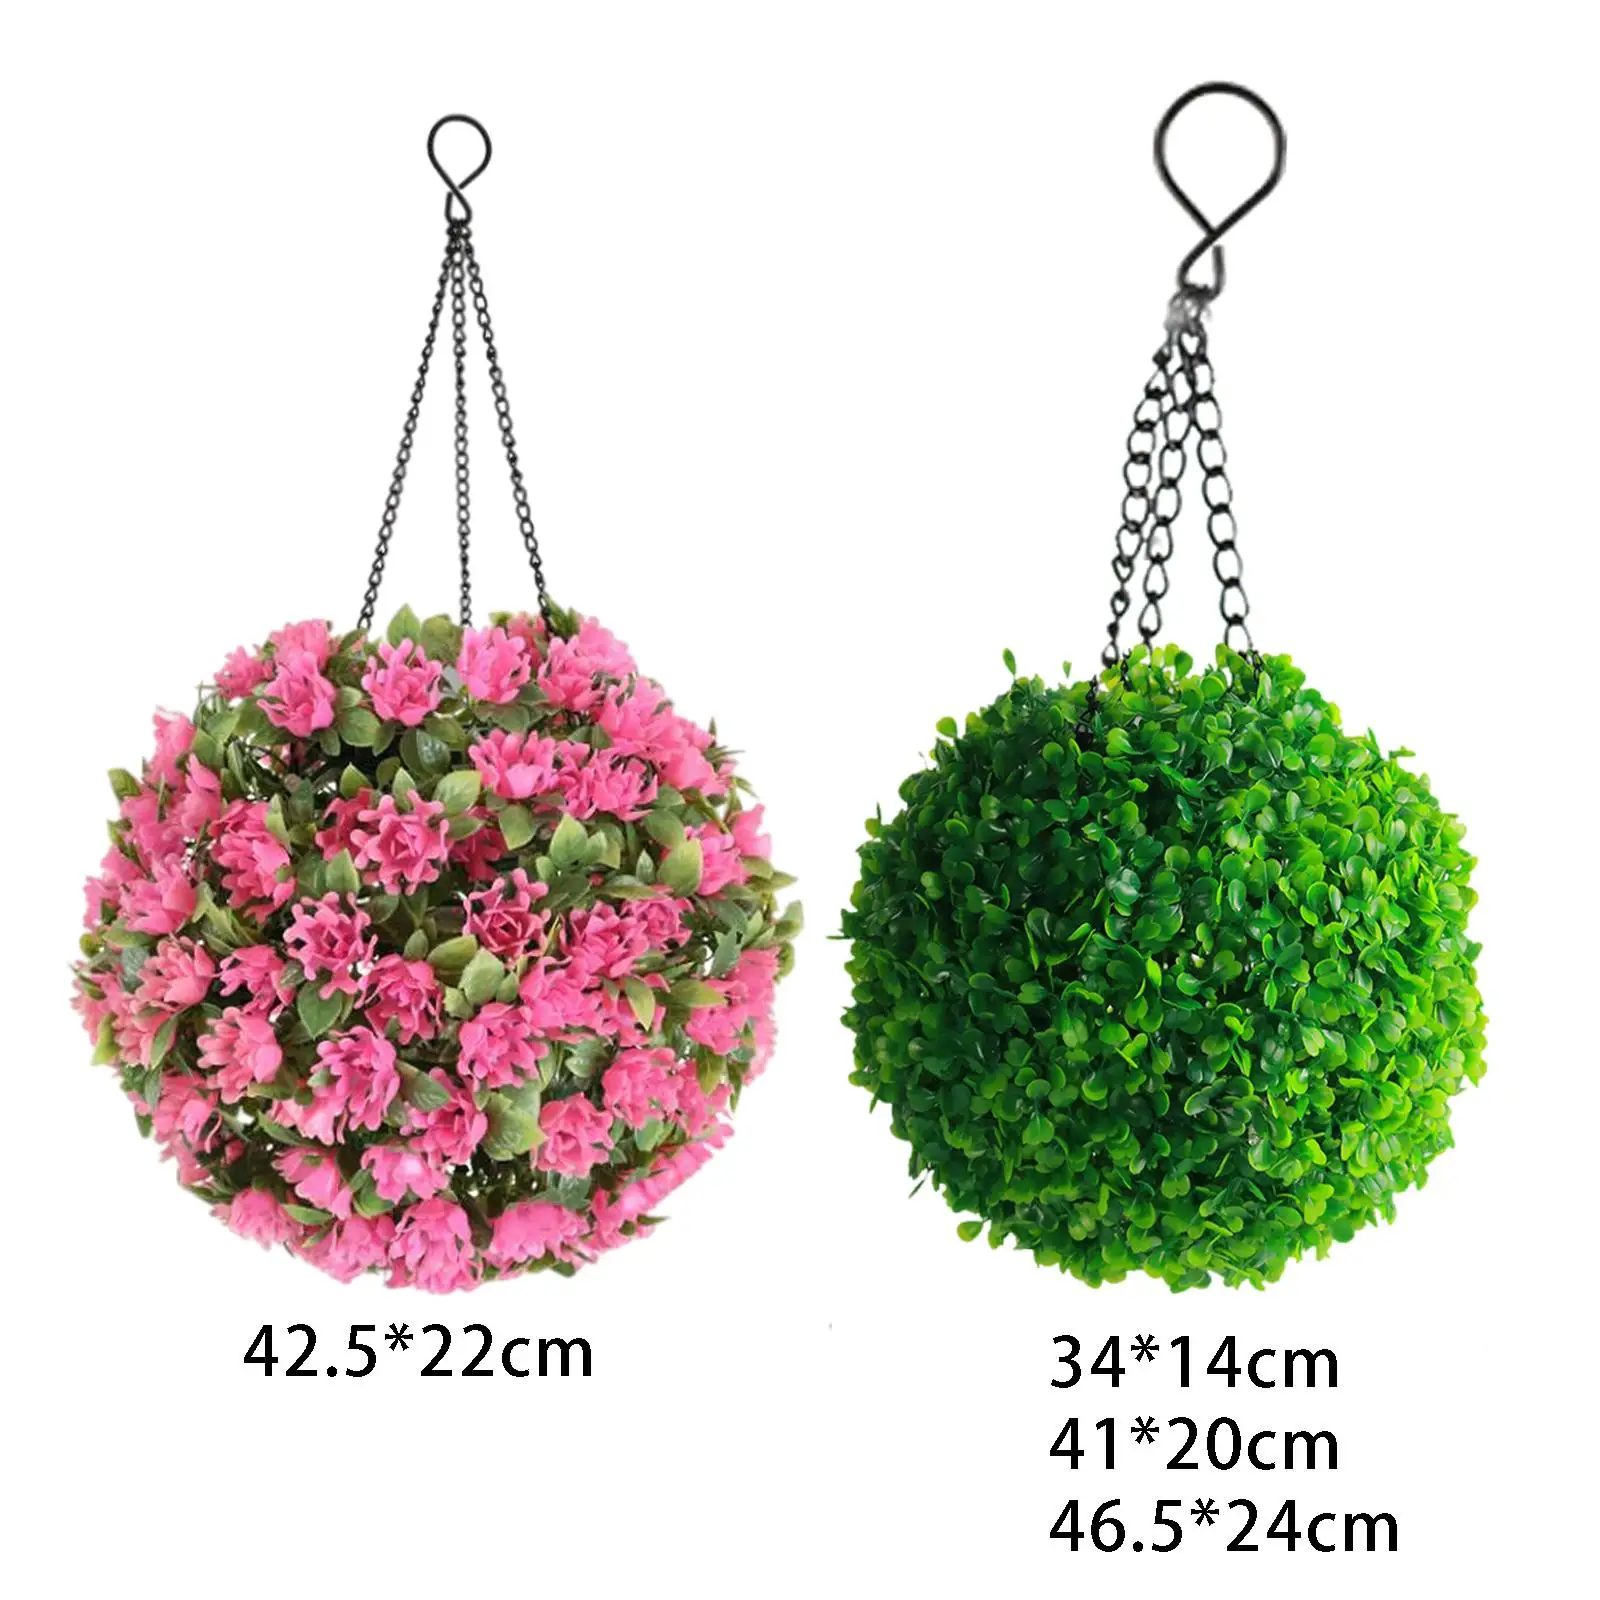 Grass Ball LED Hanging Light Artificial Leaf Topiary Ball Hanging Lantern LED Light for Wedding Porch Balcony Outdoor Ornaments